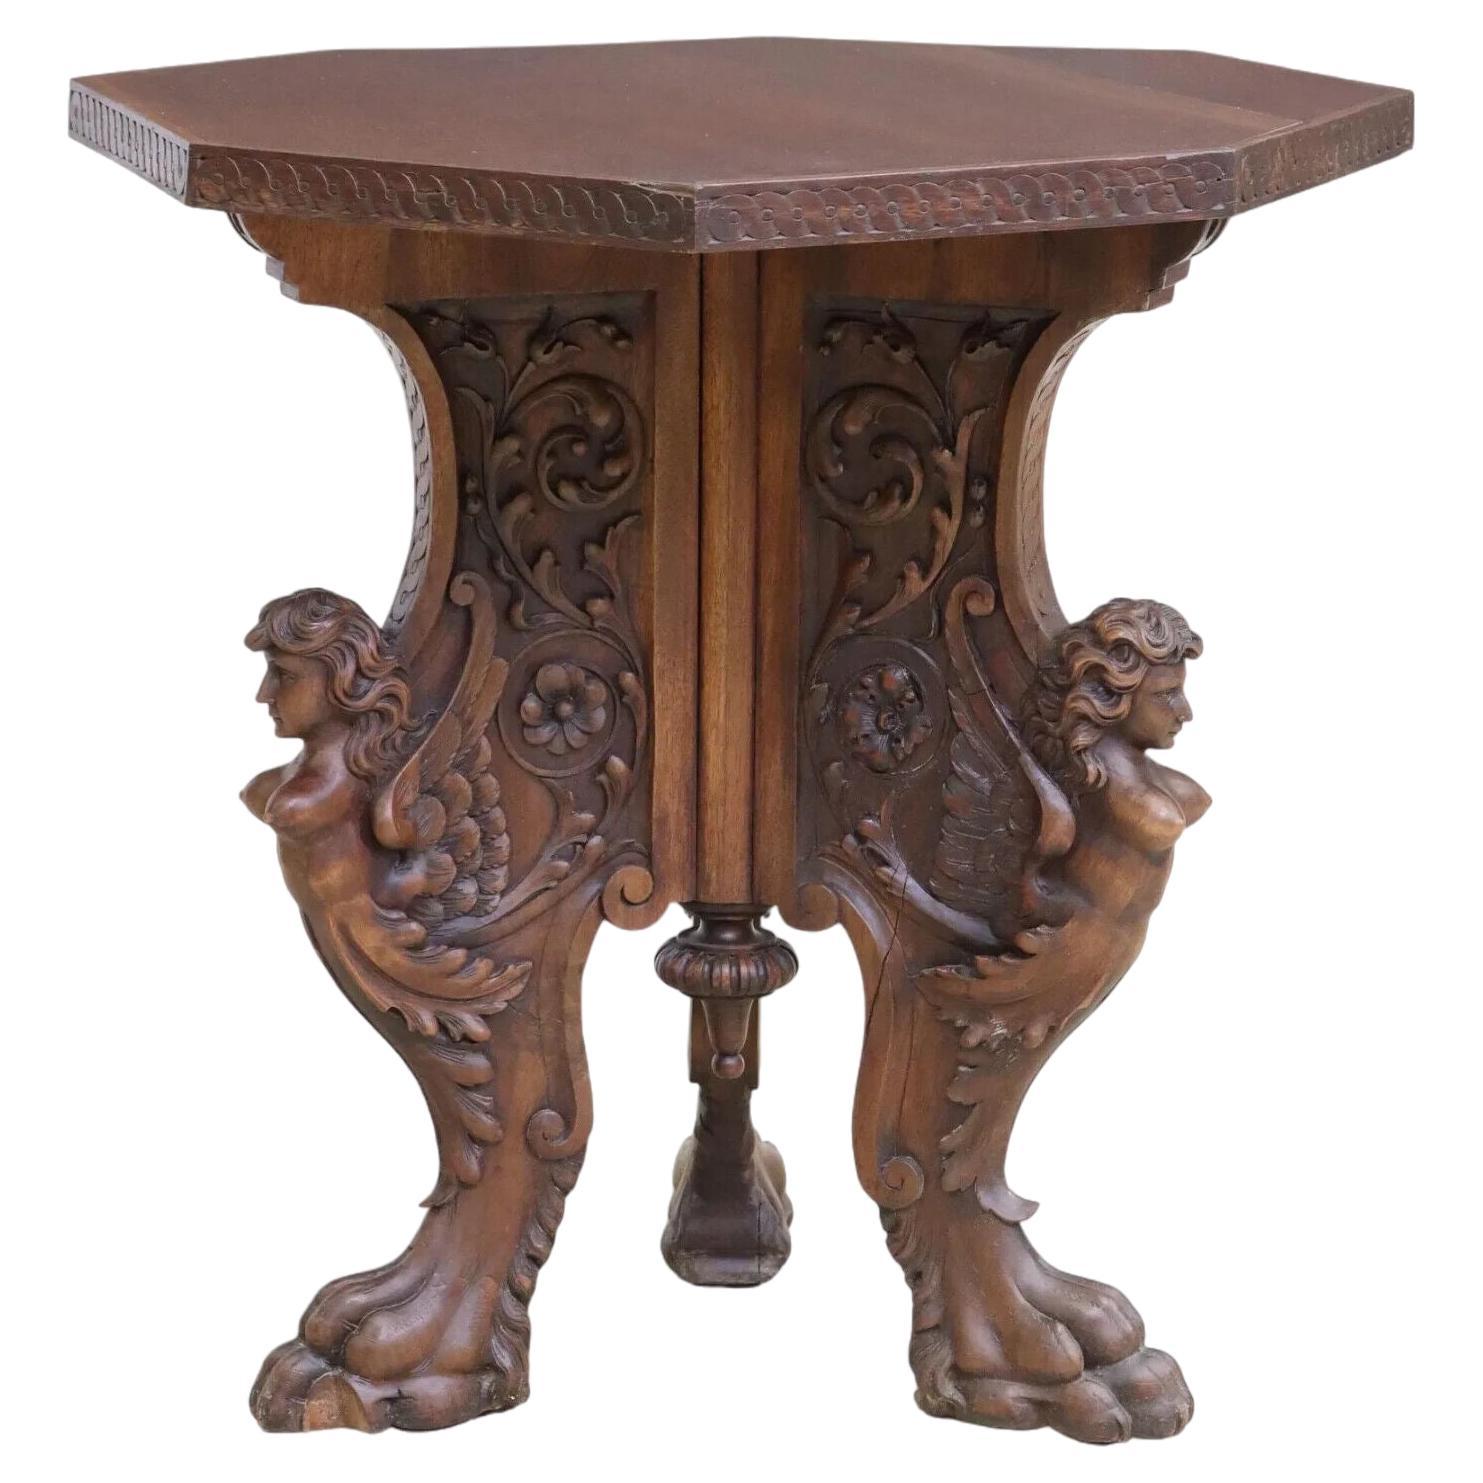 19th/20th C. Italian Renaissance Revival, Carved Walnut, Tripod, Center Table! For Sale